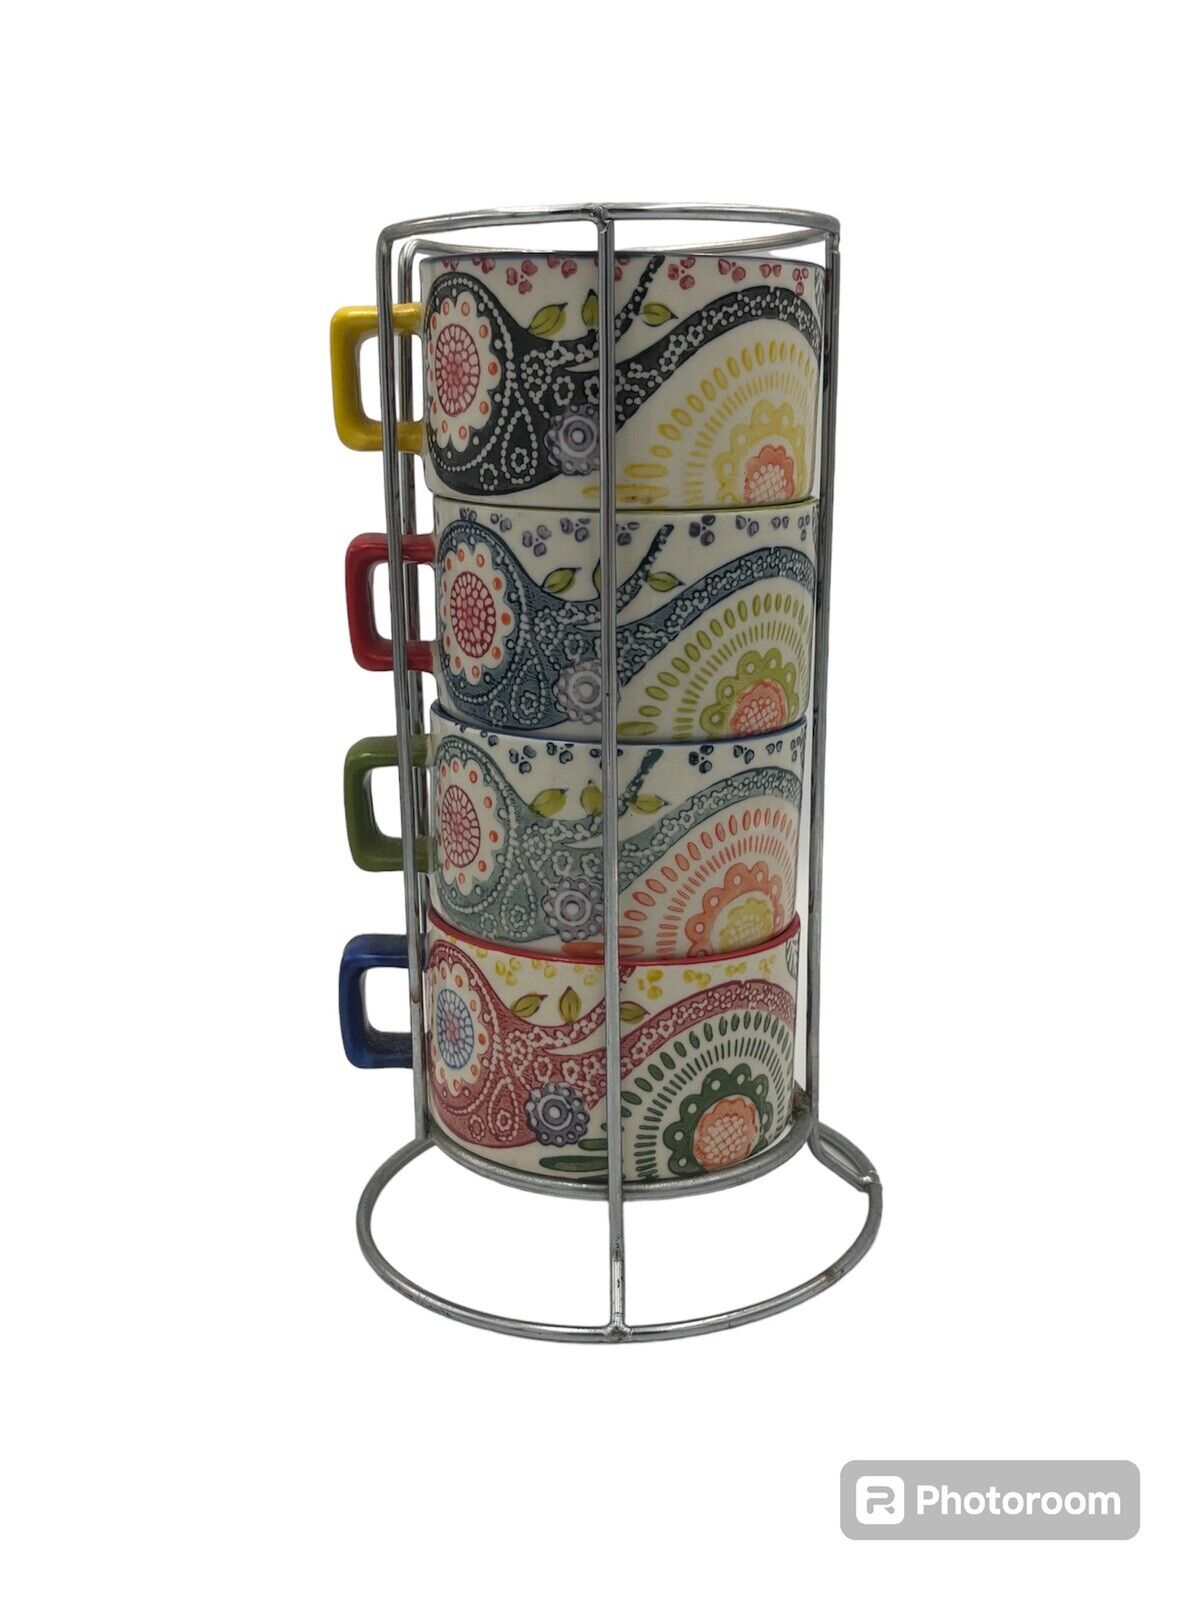 Pier 1 Imports Stacking Coffee Mugs Cups Multicolor w Stand Boho Retro Set of 4